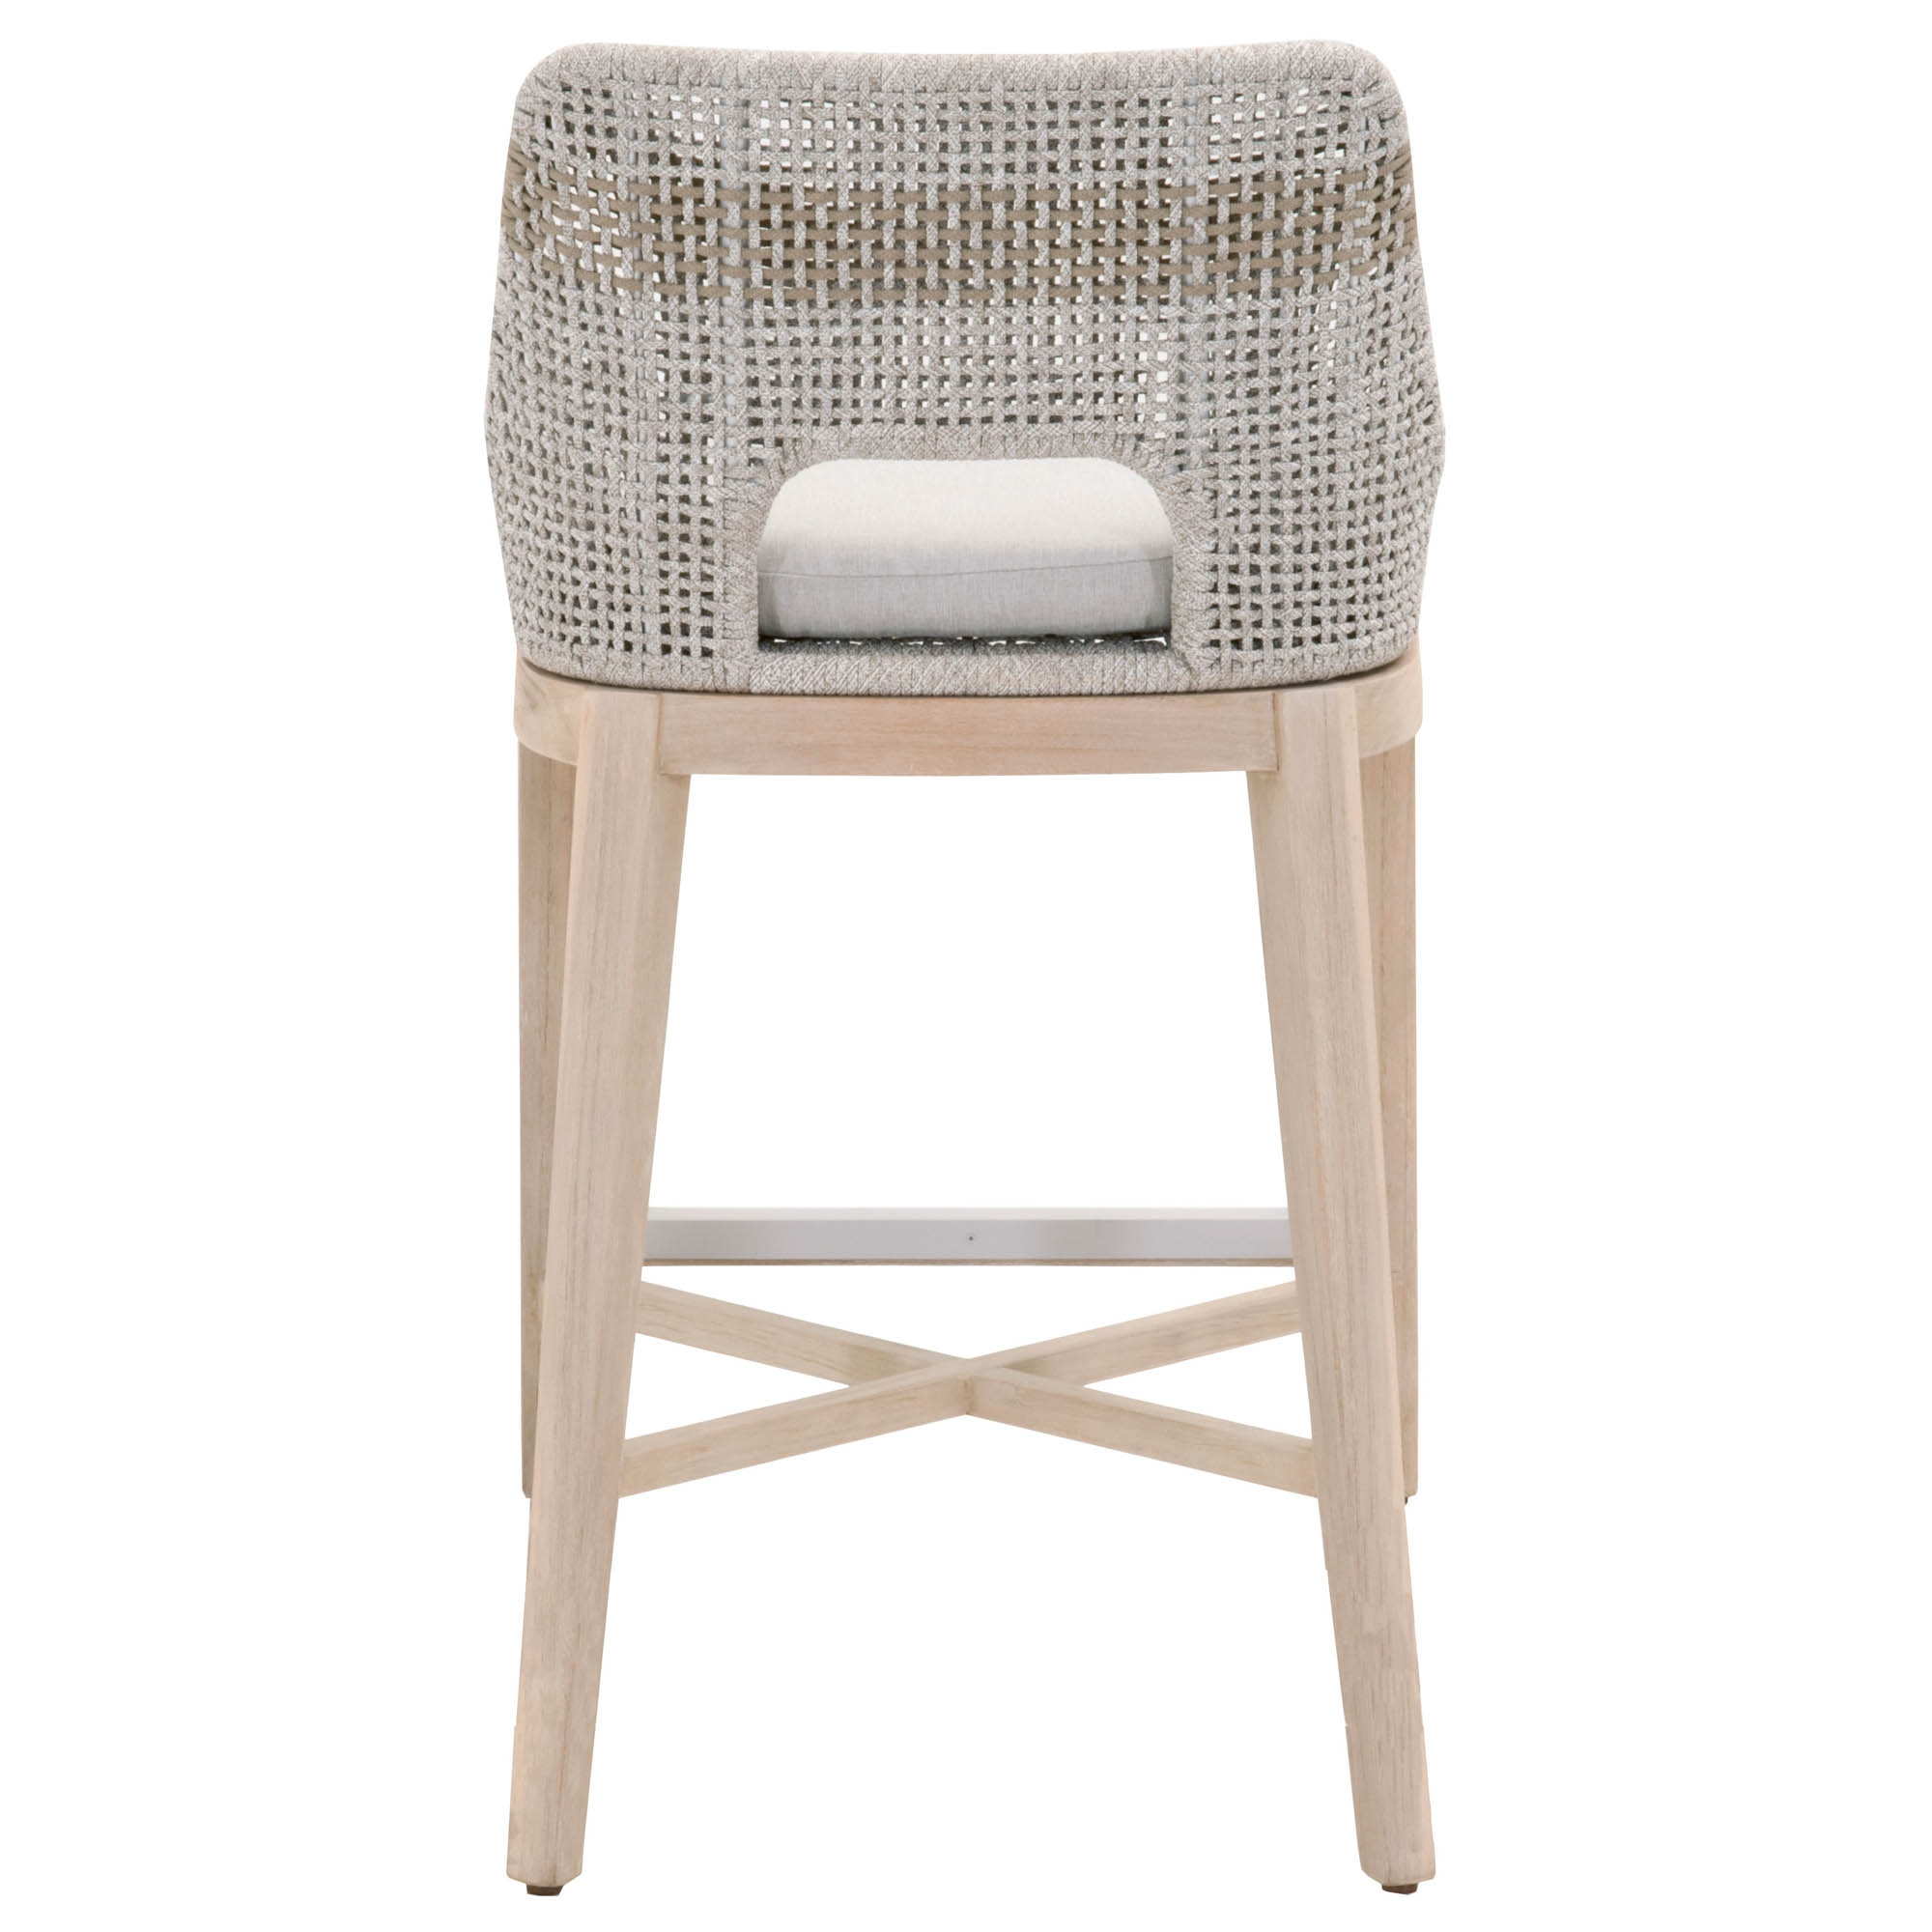 Tapestry Outdoor Barstool, Gray - Image 3